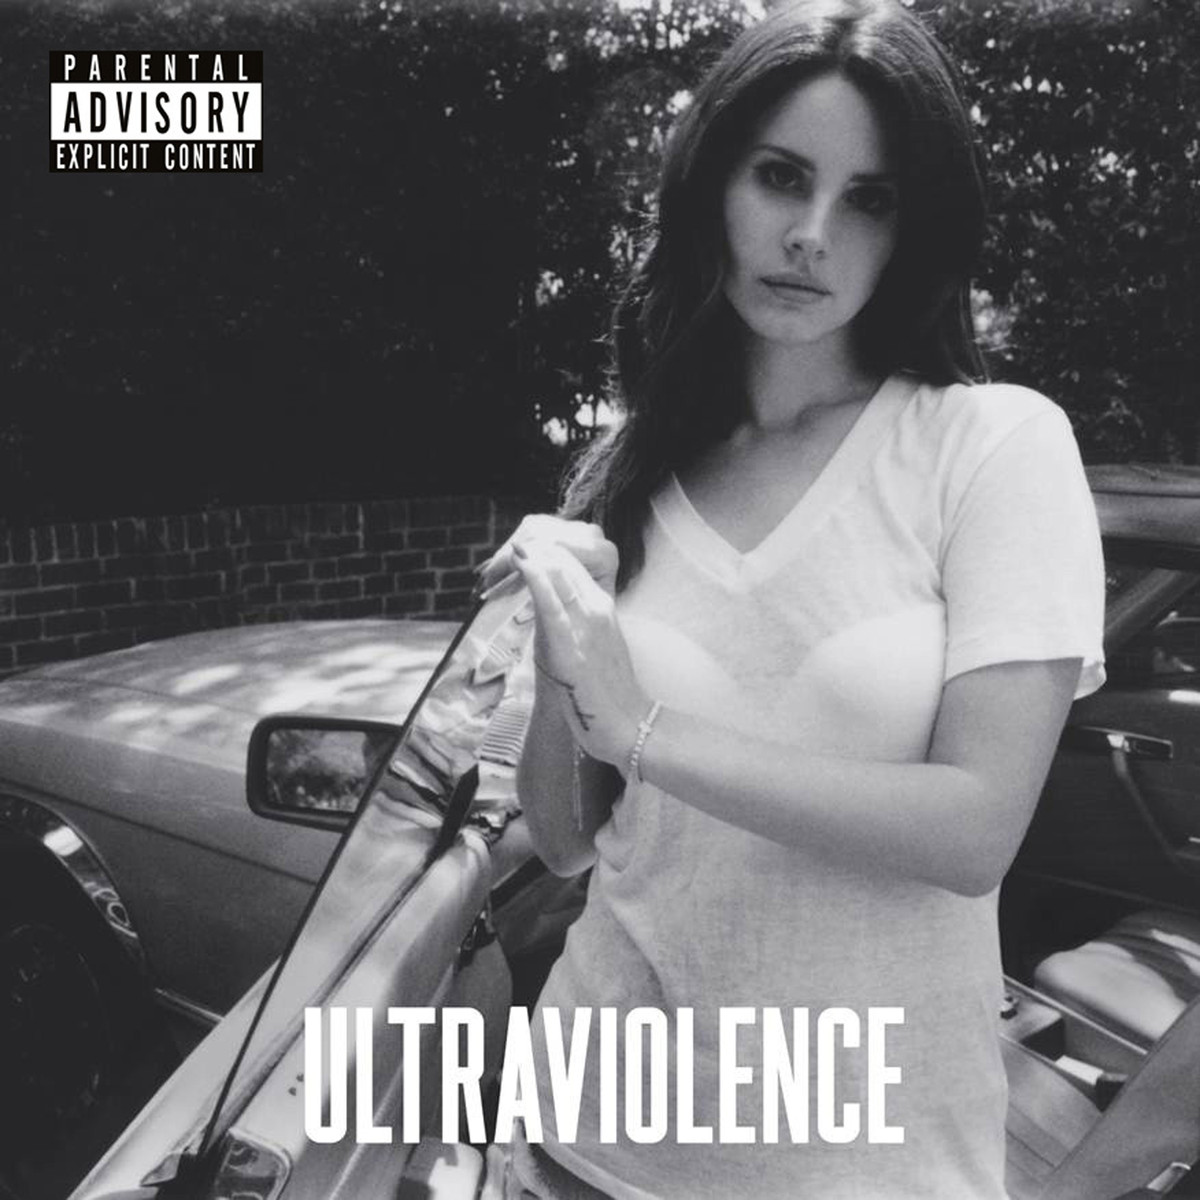 Shades of Cool歌词 歌手Lana Del Rey-专辑Ultraviolence (Deluxe Version)-单曲《Shades of Cool》LRC歌词下载